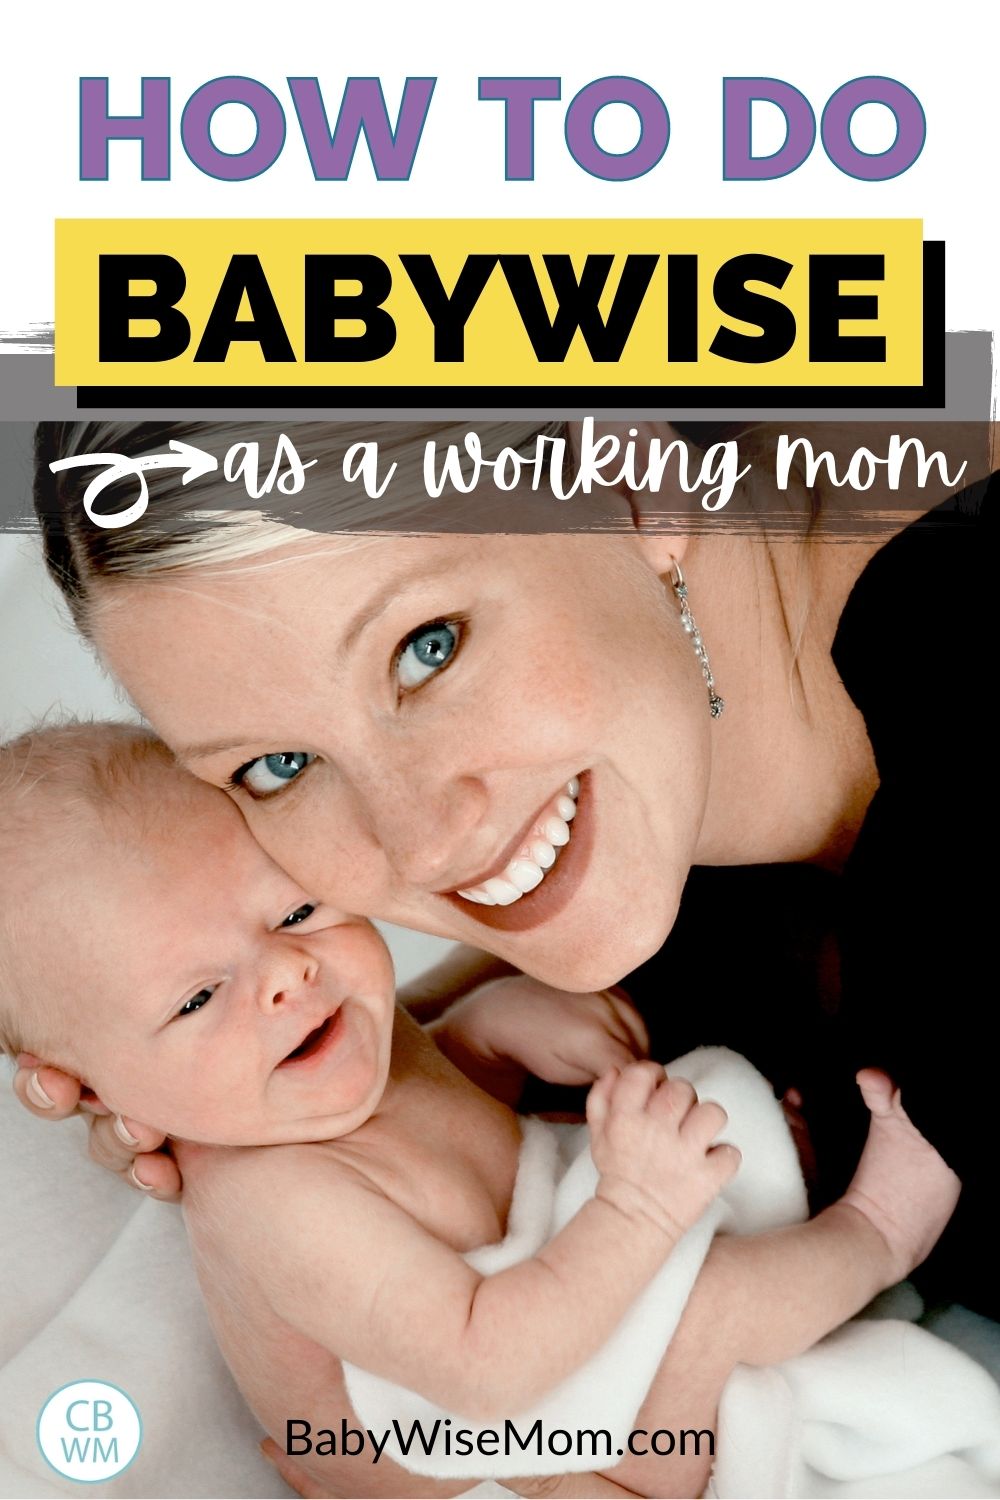 How to do Babywise as a working mom